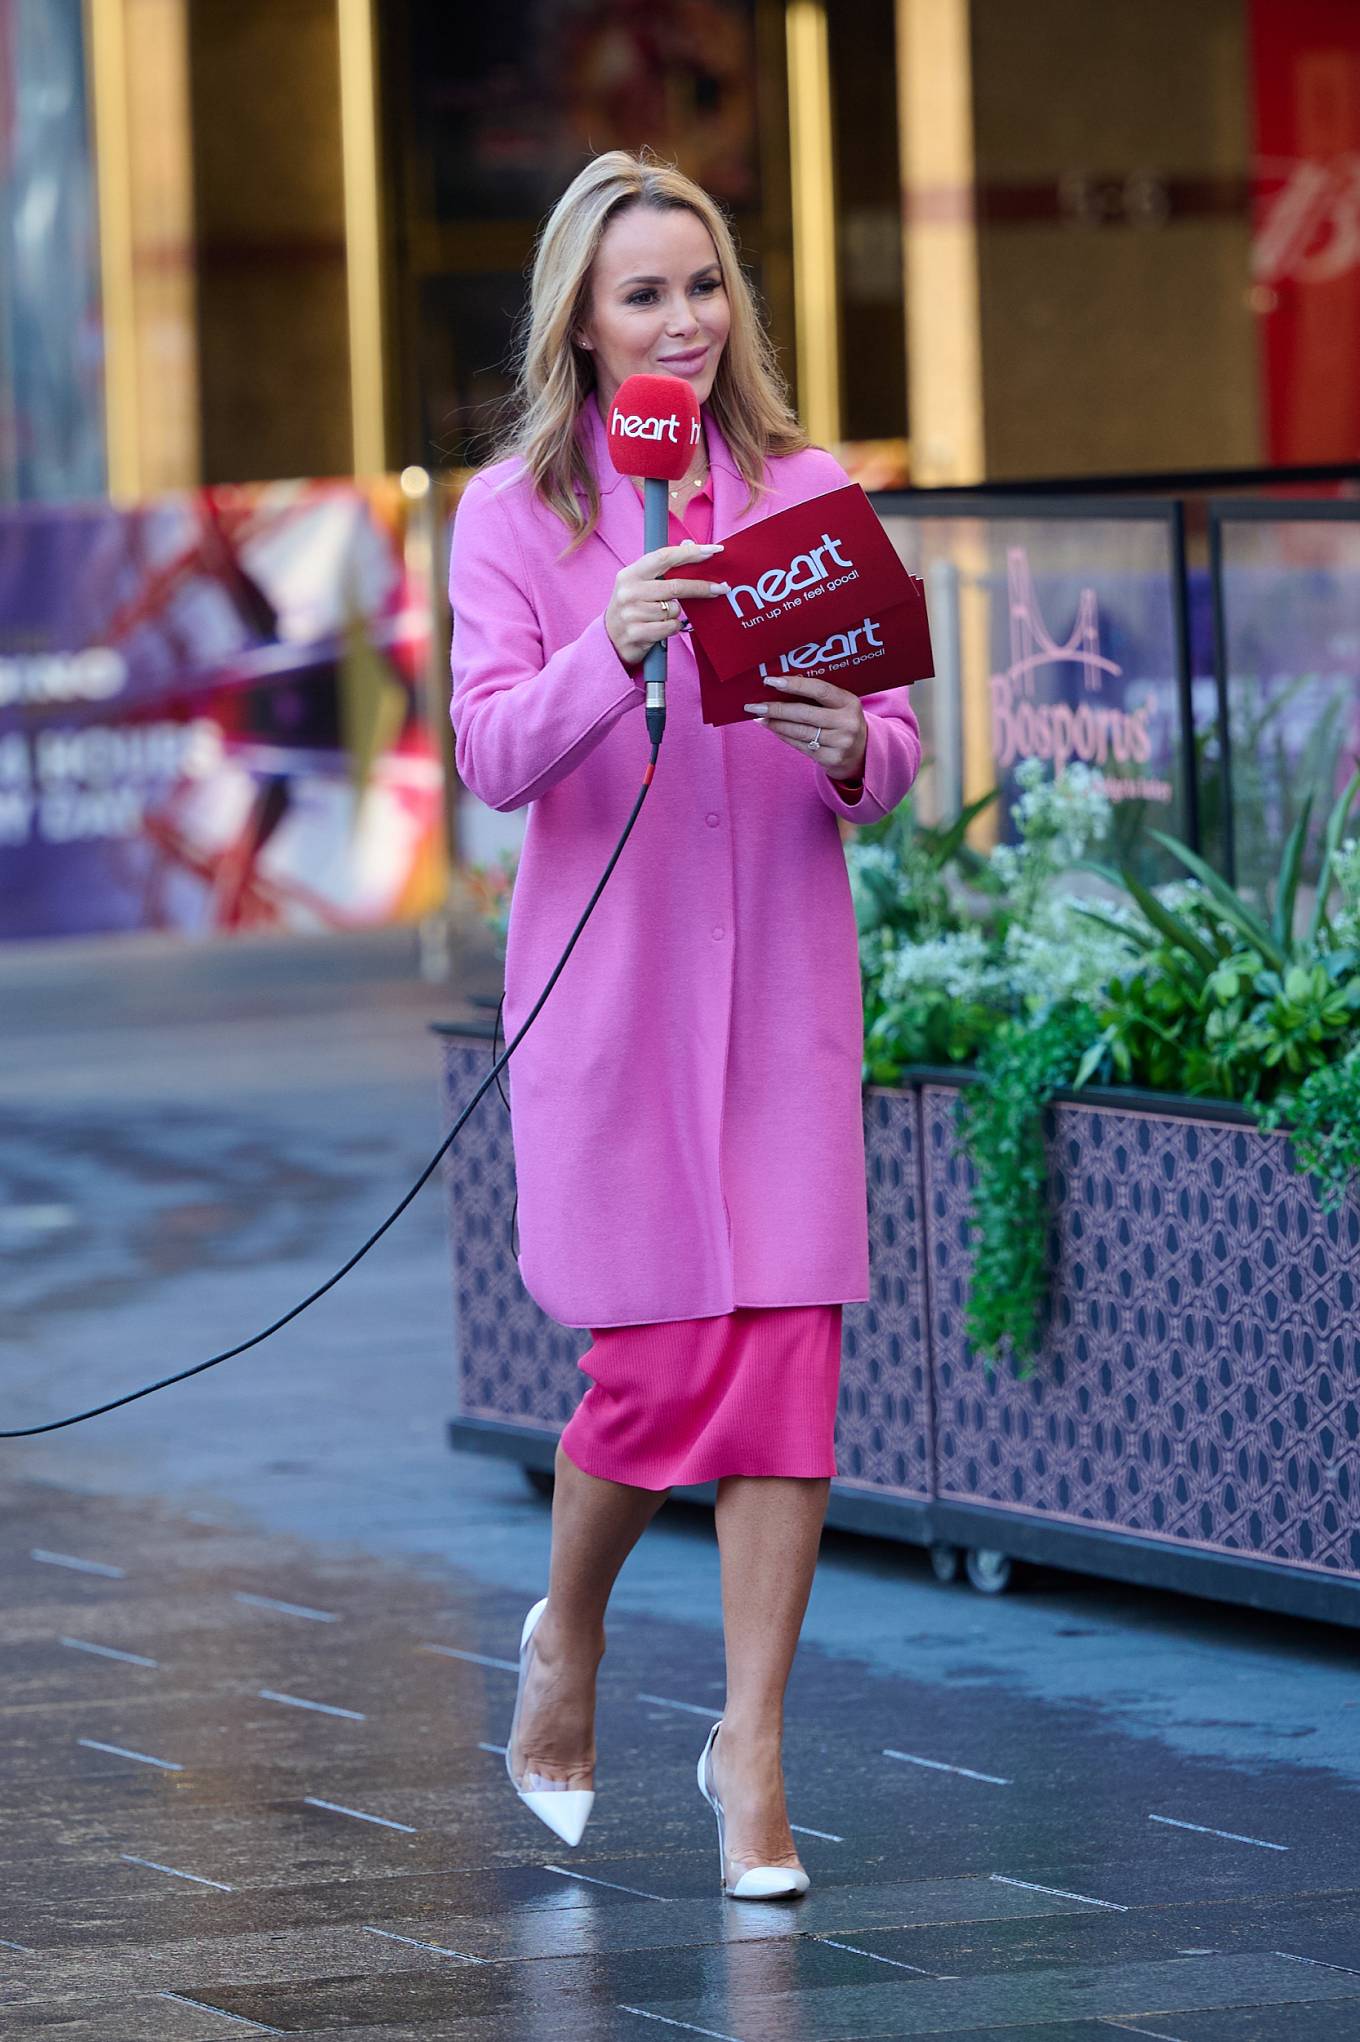 Amanda Holden 2022 : Amanda Holden – Interviewing members of the public at Global Radio in London-01